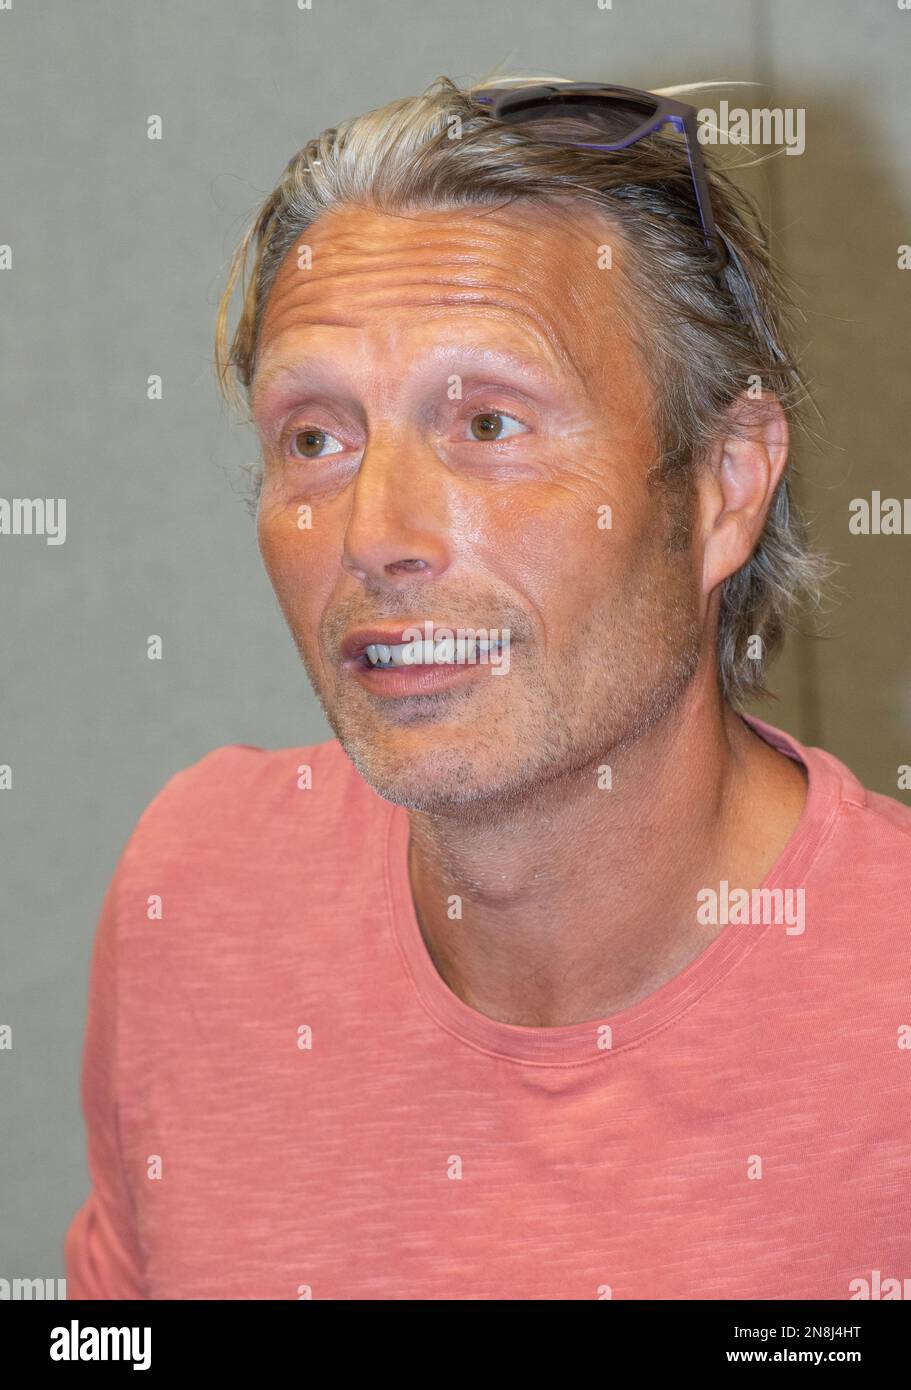 Portrait of Danish actor Mads Mikkelsen, attending the 2017 London Film Comic Con as a guest signer, at the Olympia London exhibition and event venue. Stock Photo